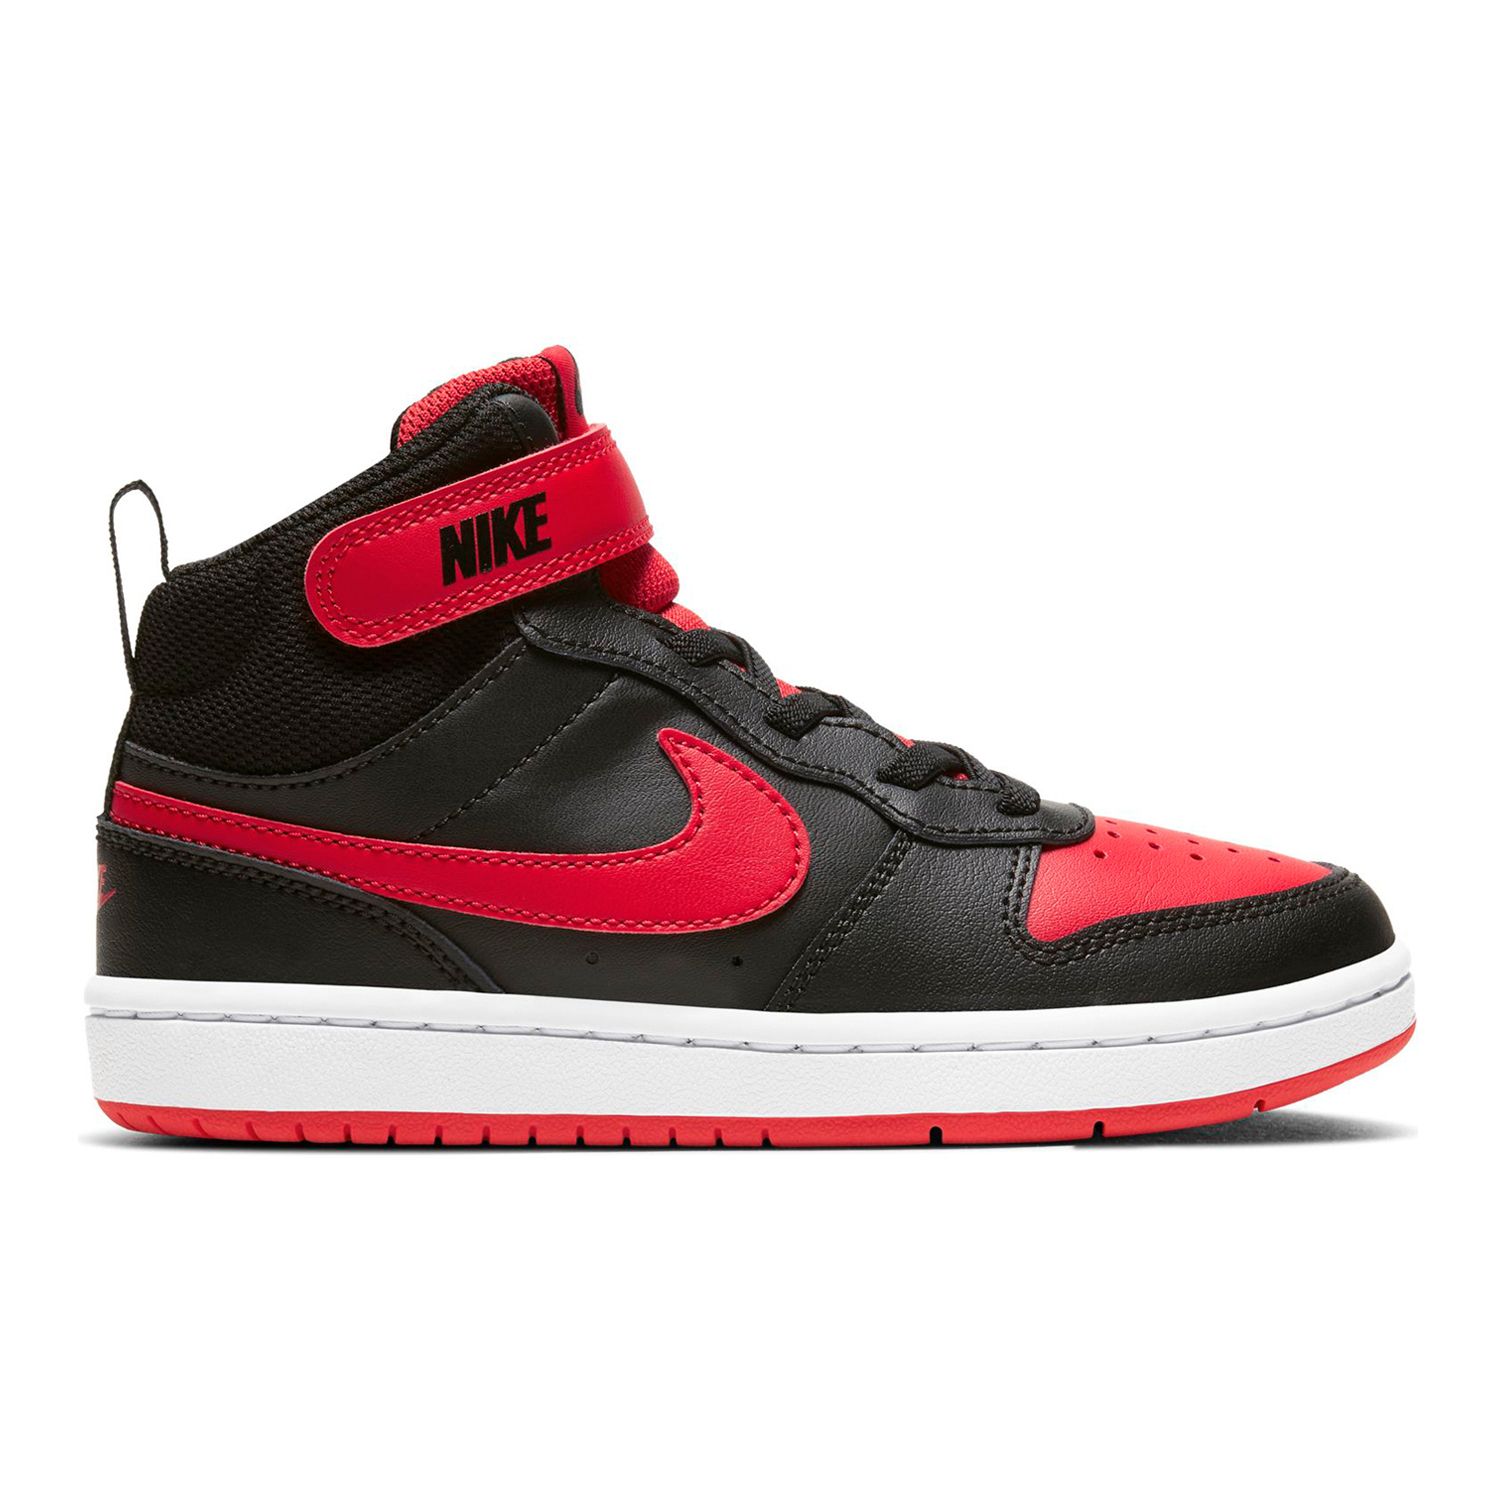 nike shoes red and black high tops